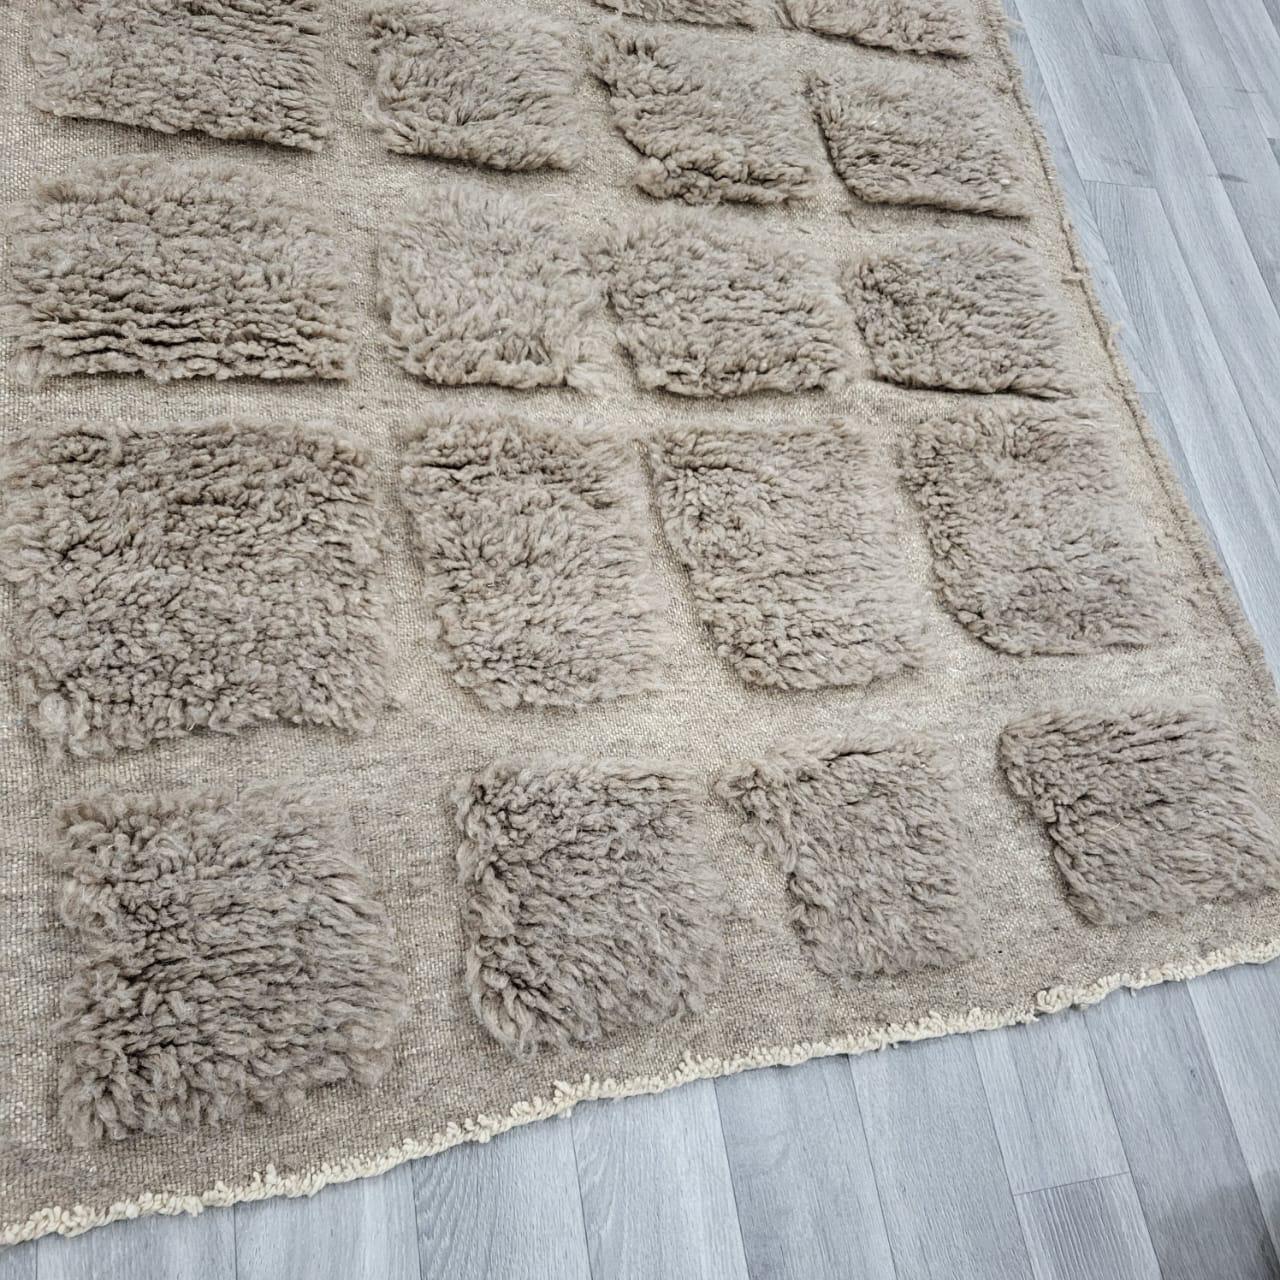 Quality Modern Rugs Moroccan Influence, Trendy Style